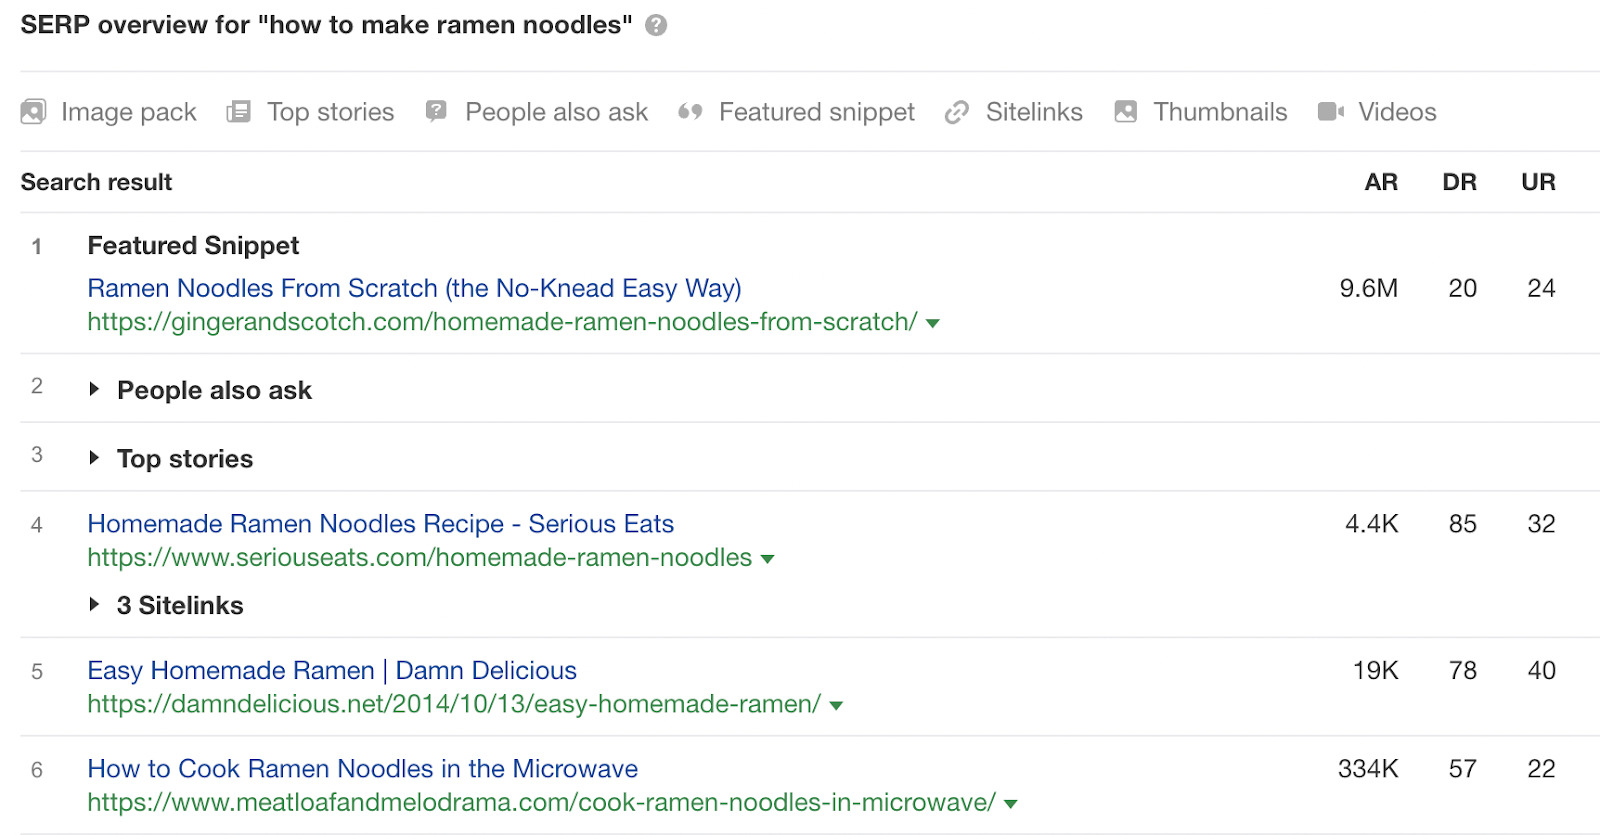 SERP overview for "how to make ramen noodles"